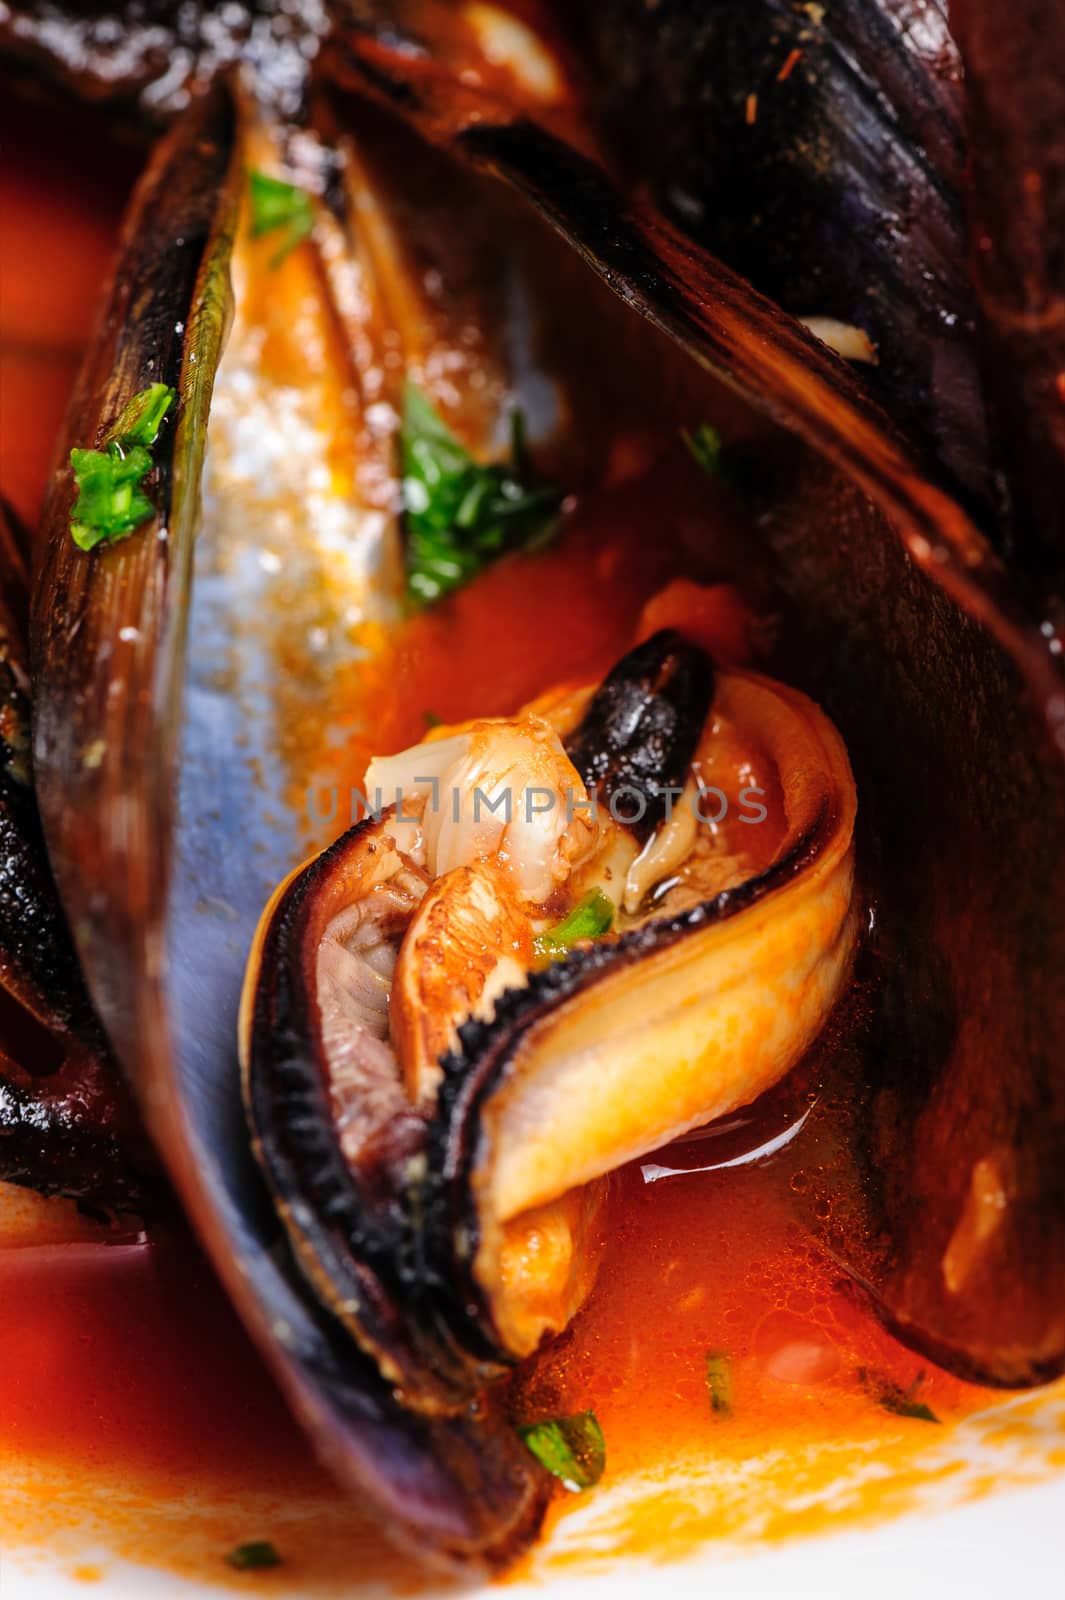 Mussels in italian rustic style by starush